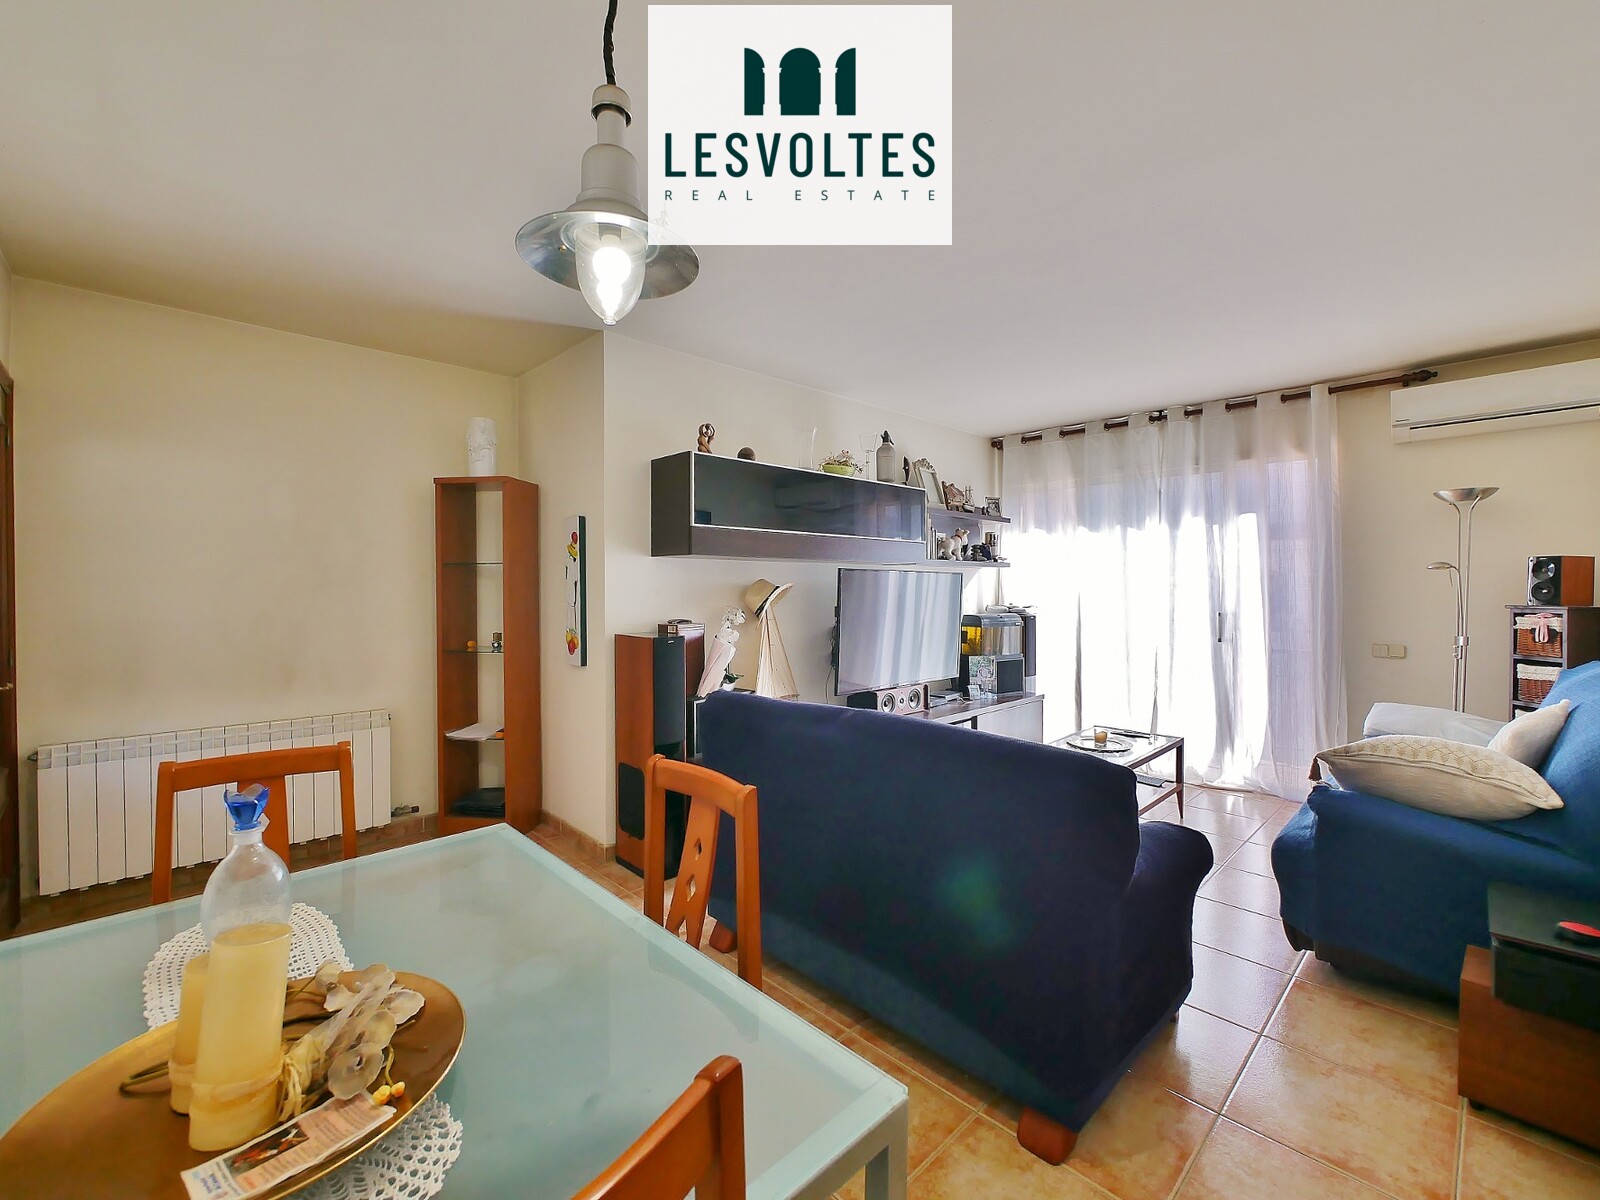 3 BEDROOM FLAT WITH BALCONY IN THE AREA OF LES PALMERES IN PALAFRUGELL.